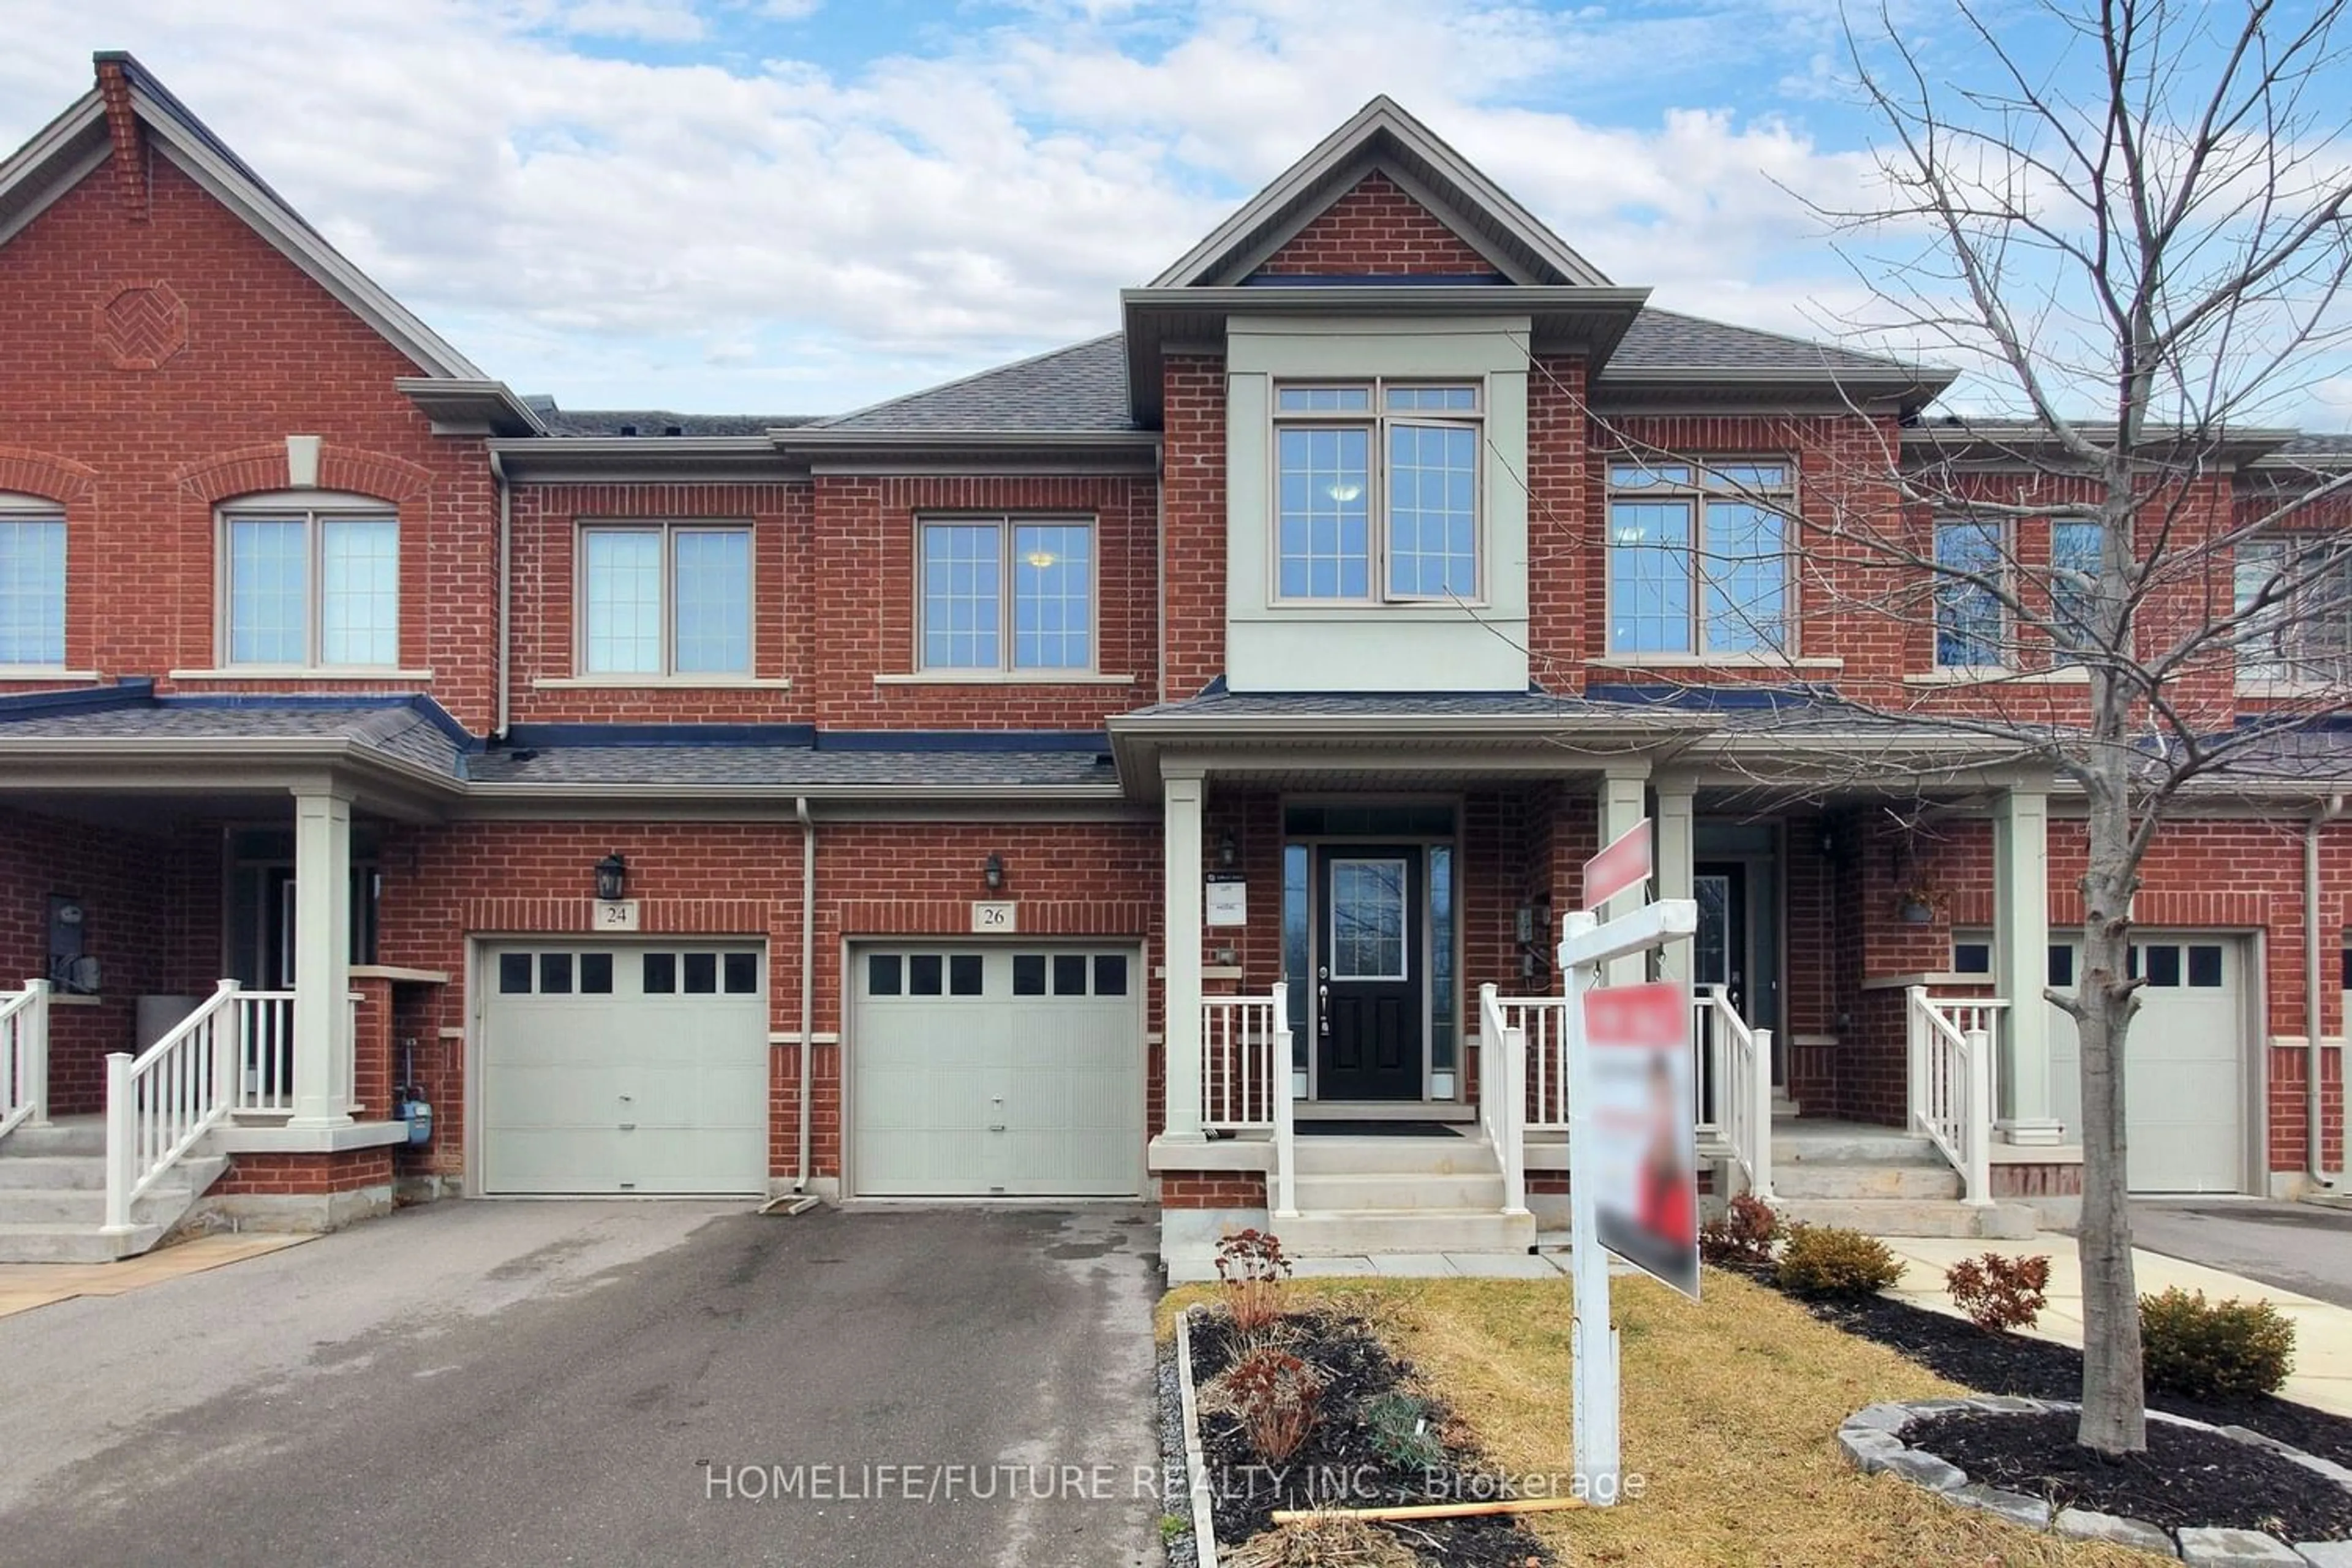 Home with brick exterior material for 26 Lady Evelyn Cres, Brampton Ontario L6Y 6C7